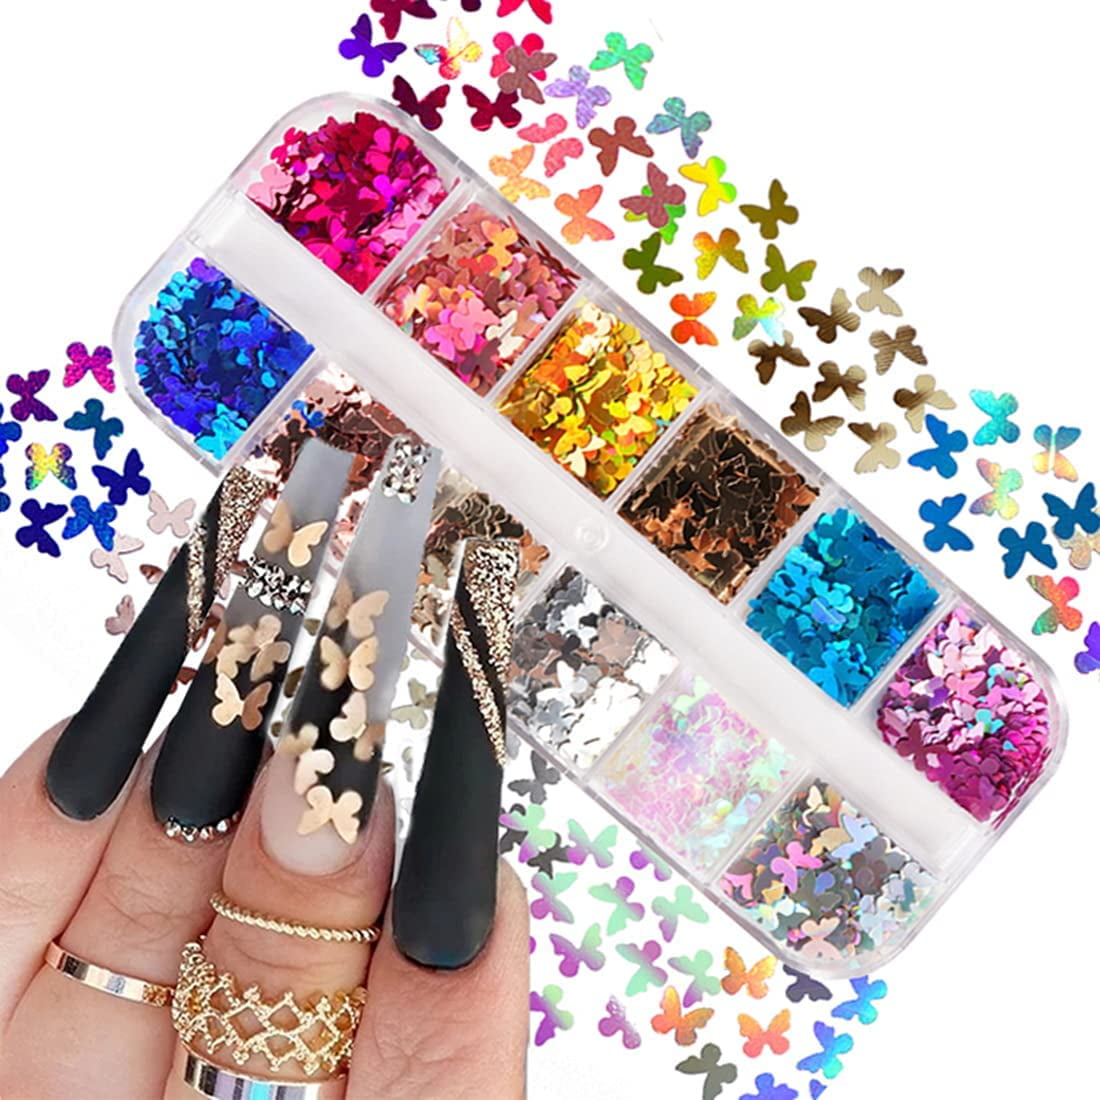 Nail Foil 3D Sparking Gold Flakes for Nails 12 Grids Metallic Nail Glitter  Nail Foil Flakes for Holographic Nail Foil Sequins